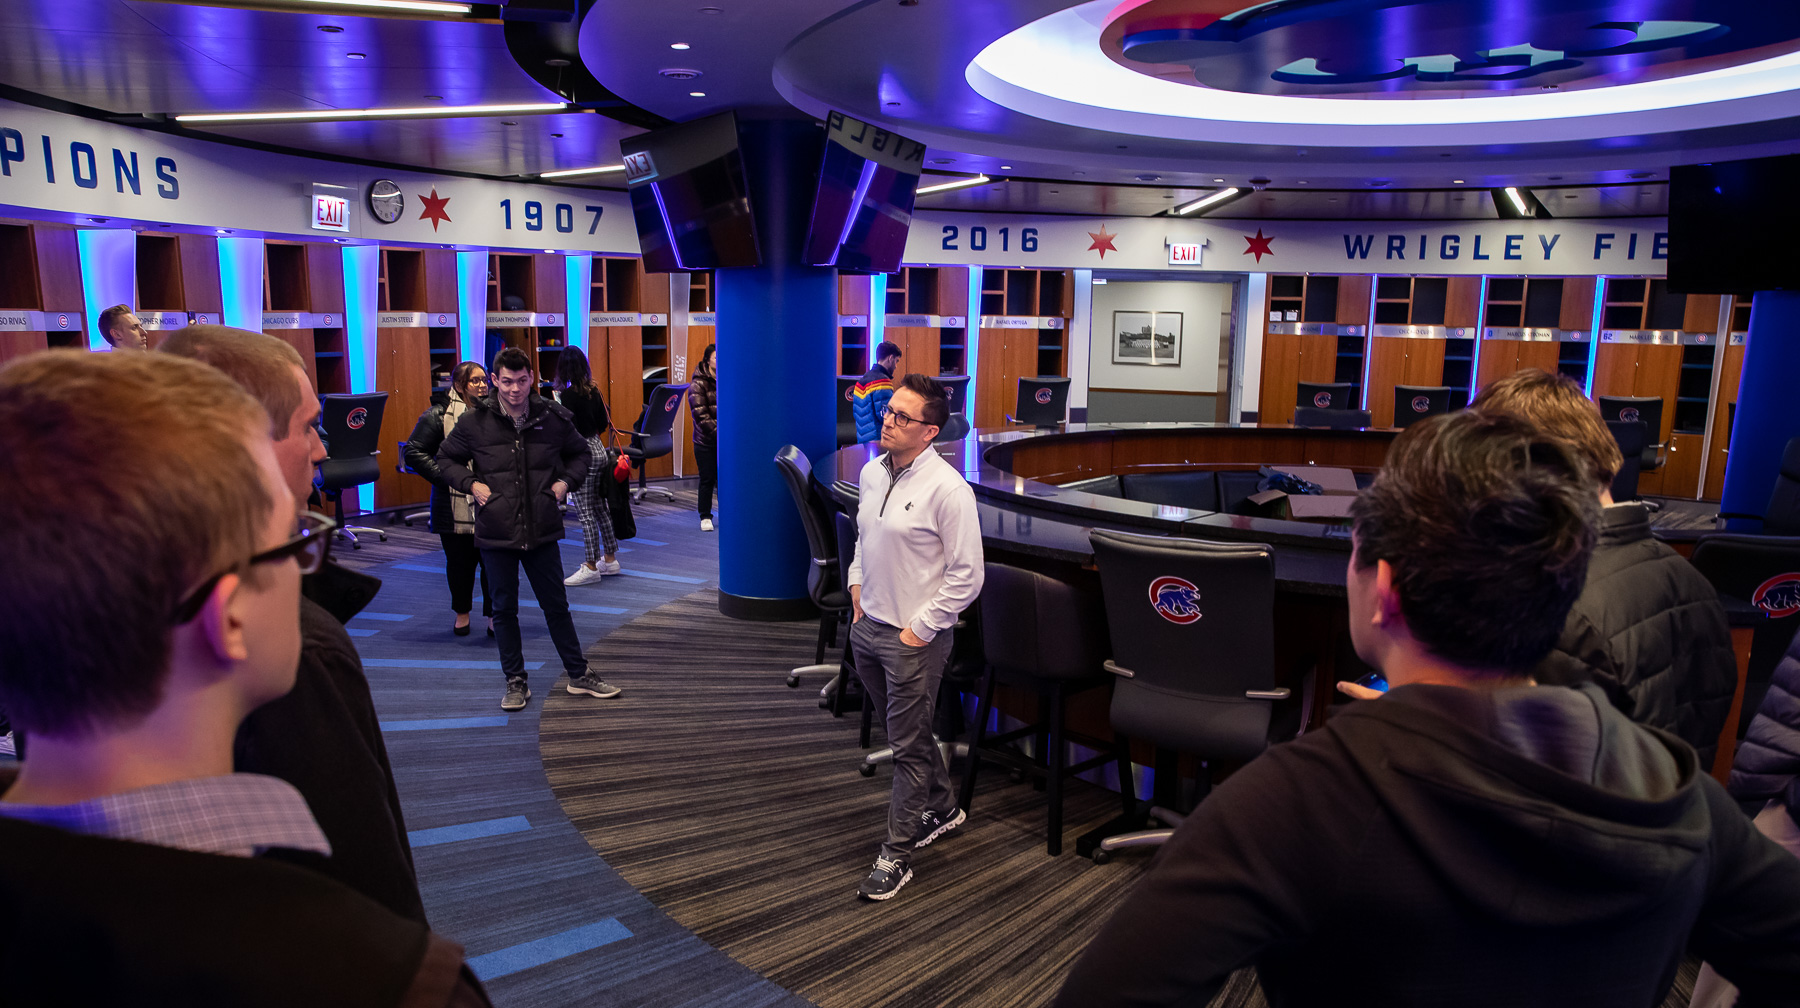 Colin Faulkner, executive vice president of Sales and Marketing and chief commercial officer for the Chicago Cubs, lead the class through the newly renovated areas beneath Wrigley Field.